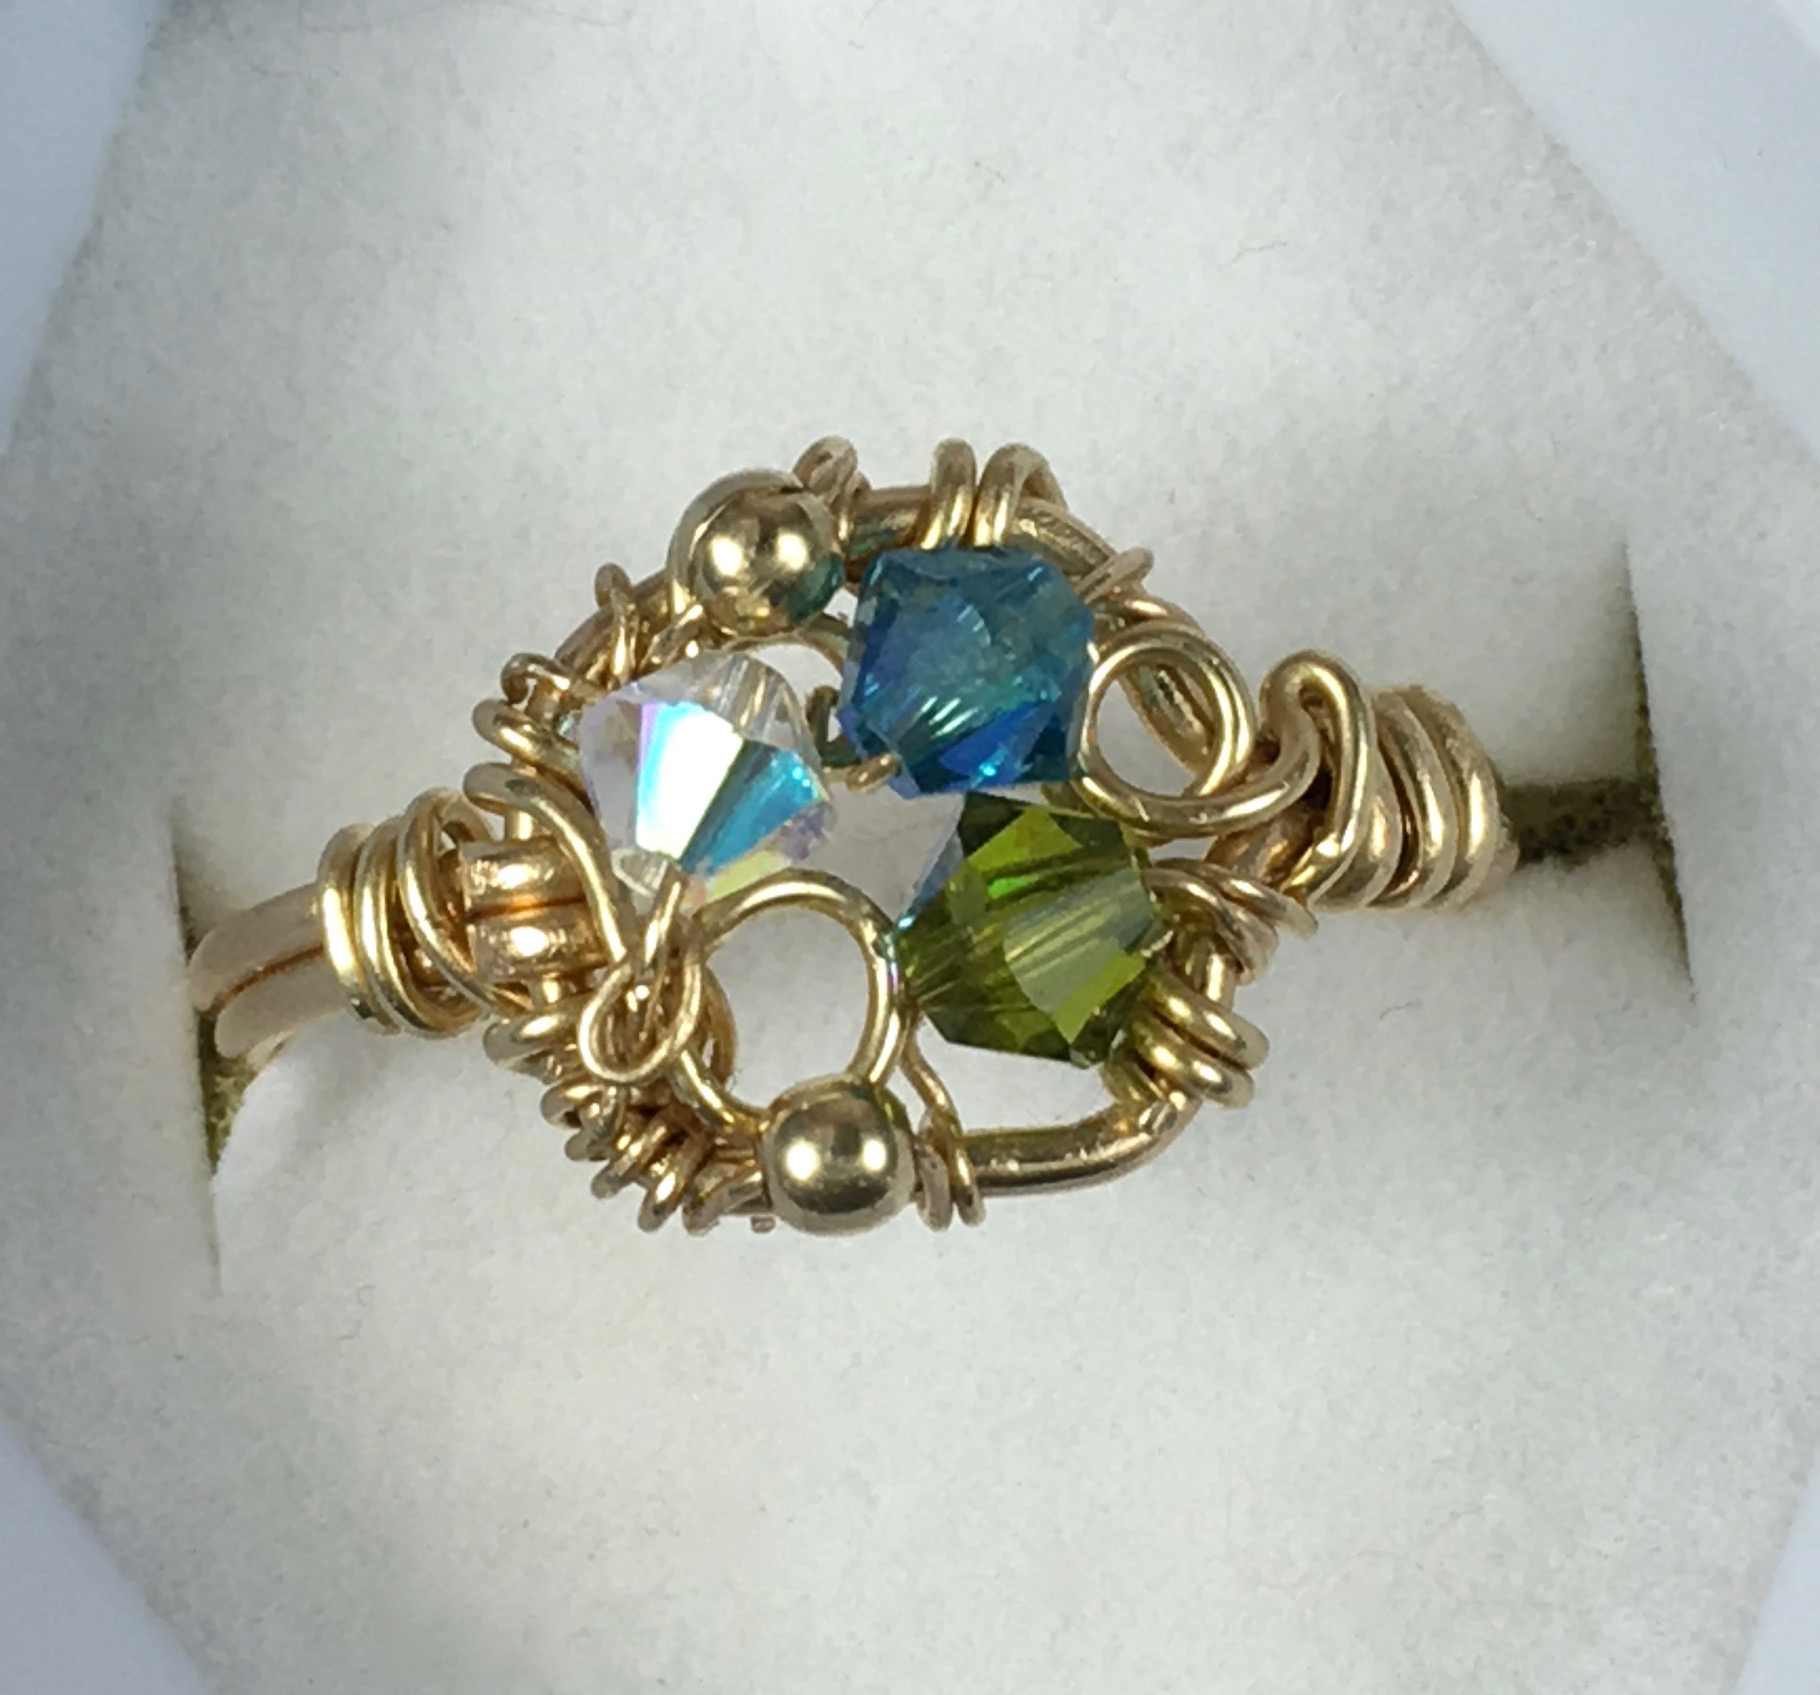 A gold ring with a white, blue and green jewel woven in